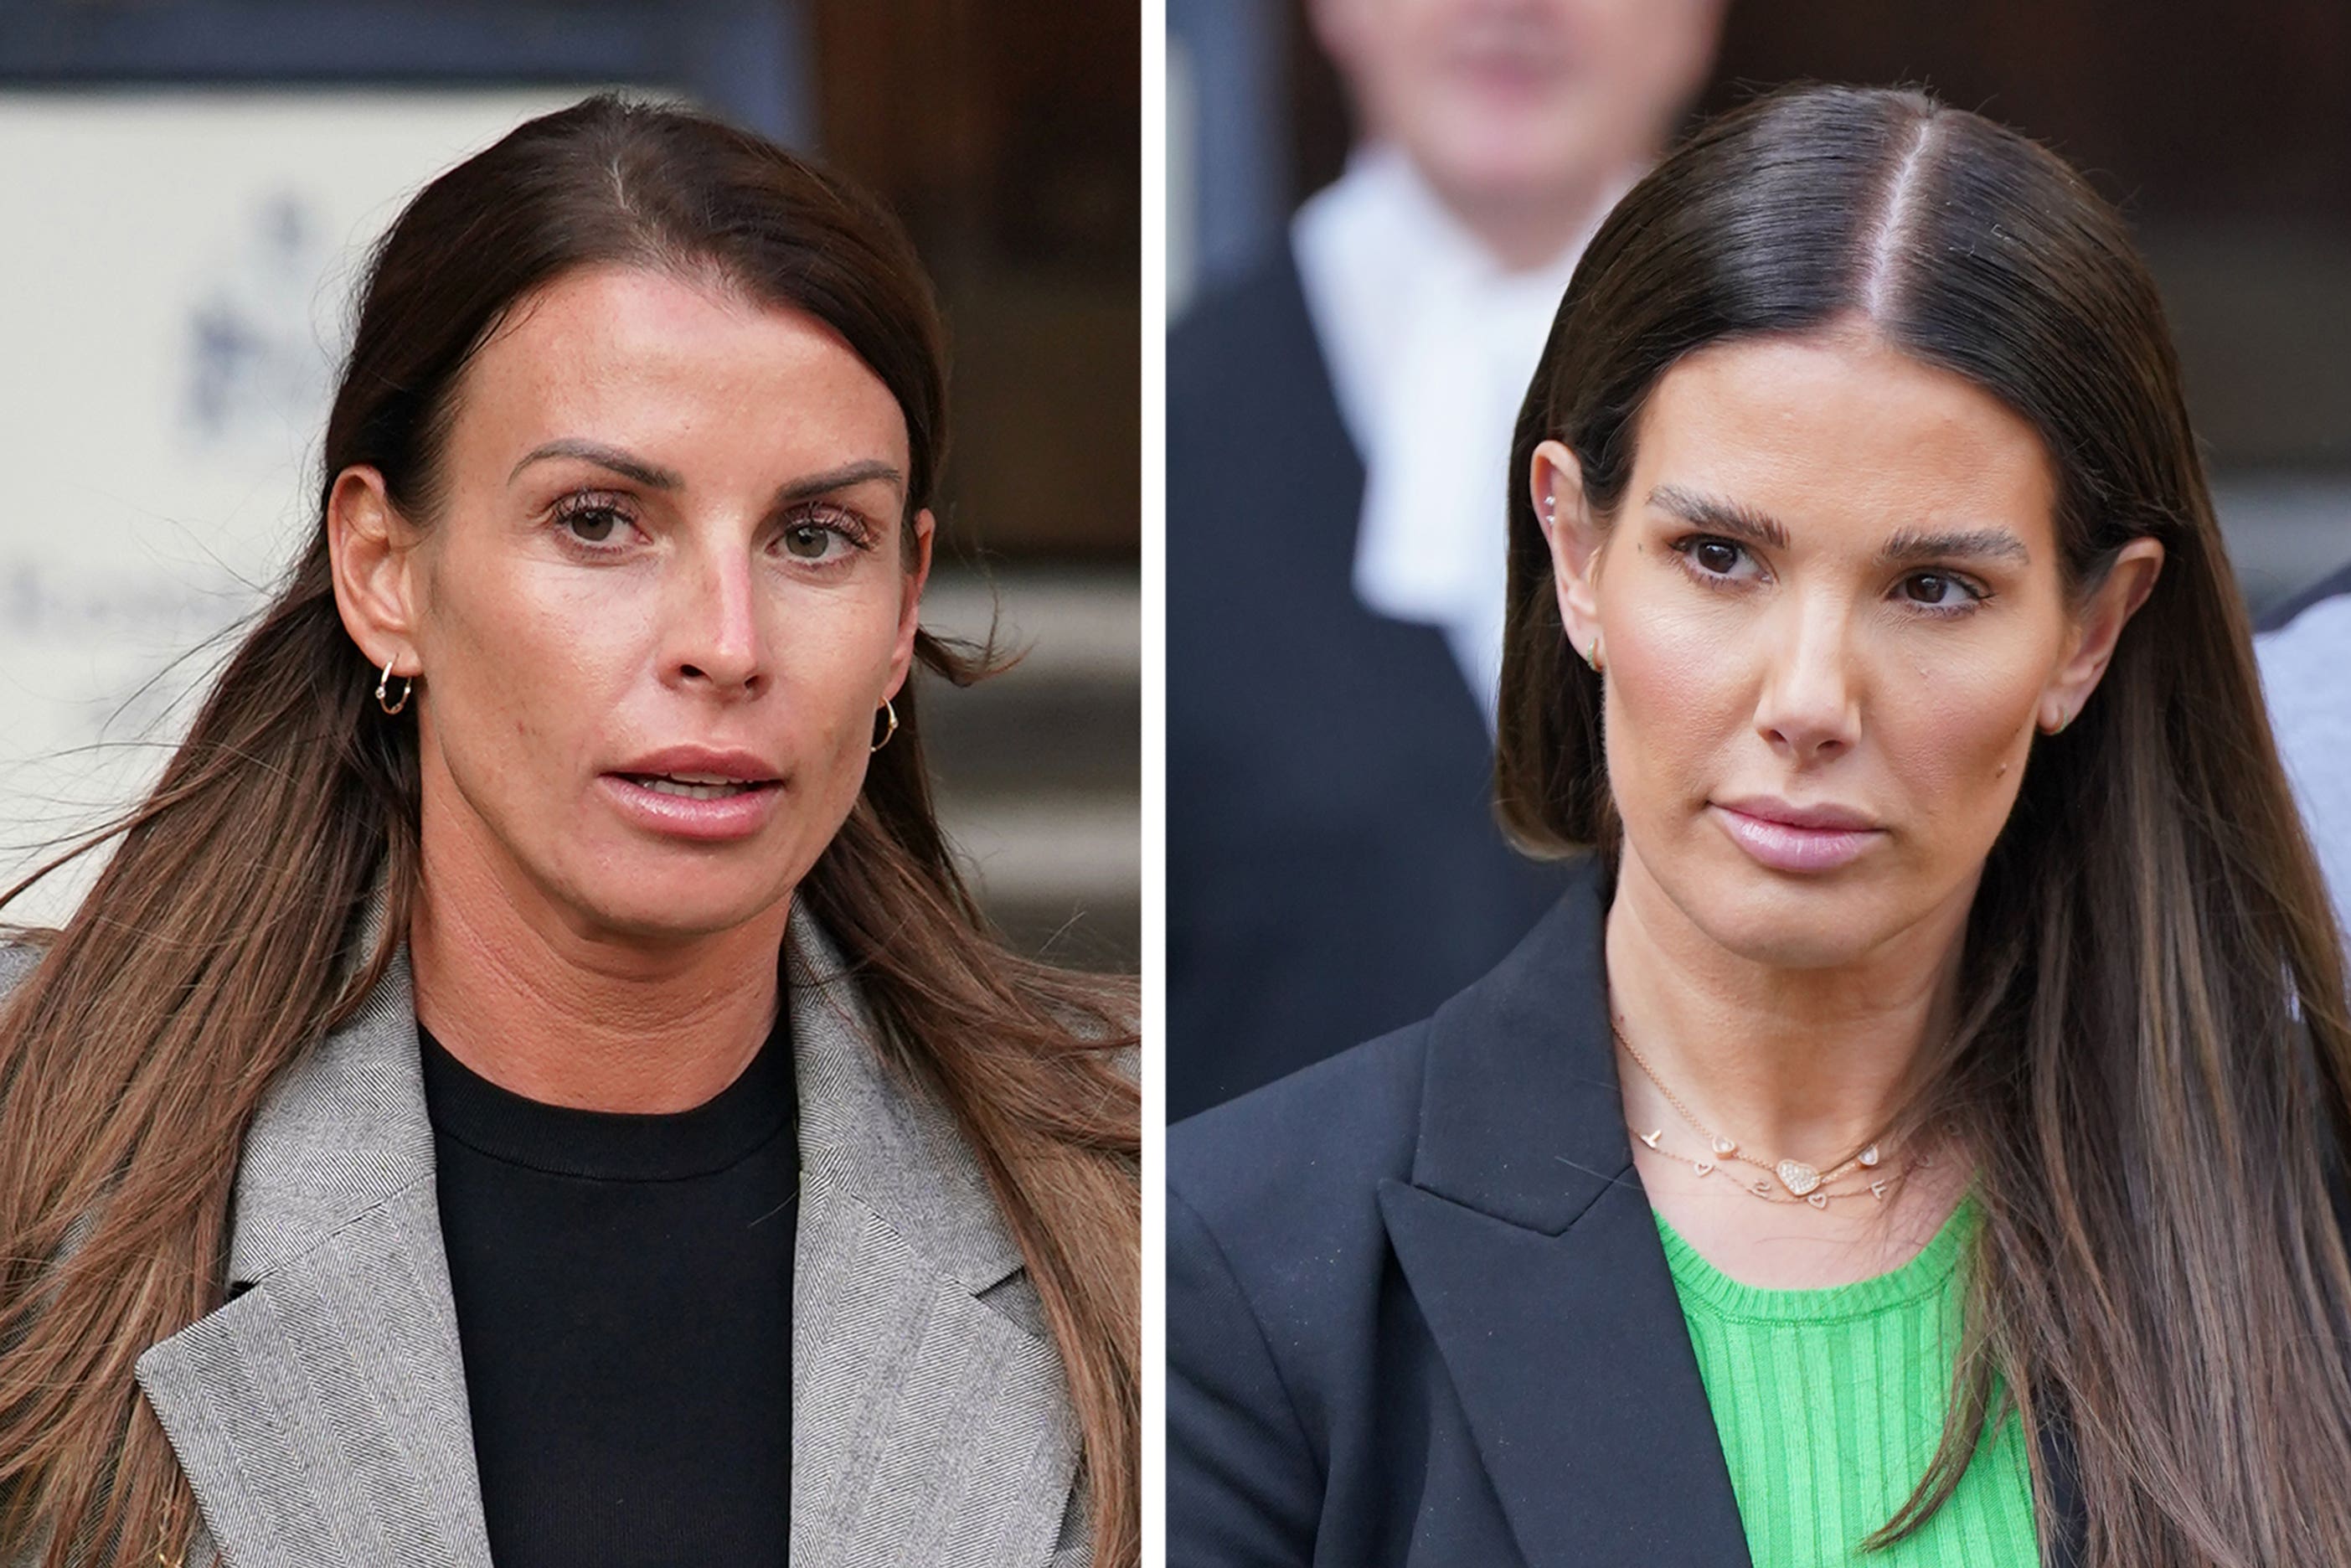 Coleen Rooney (left) and Rebekah Vardy were involved in a libel case (PA)